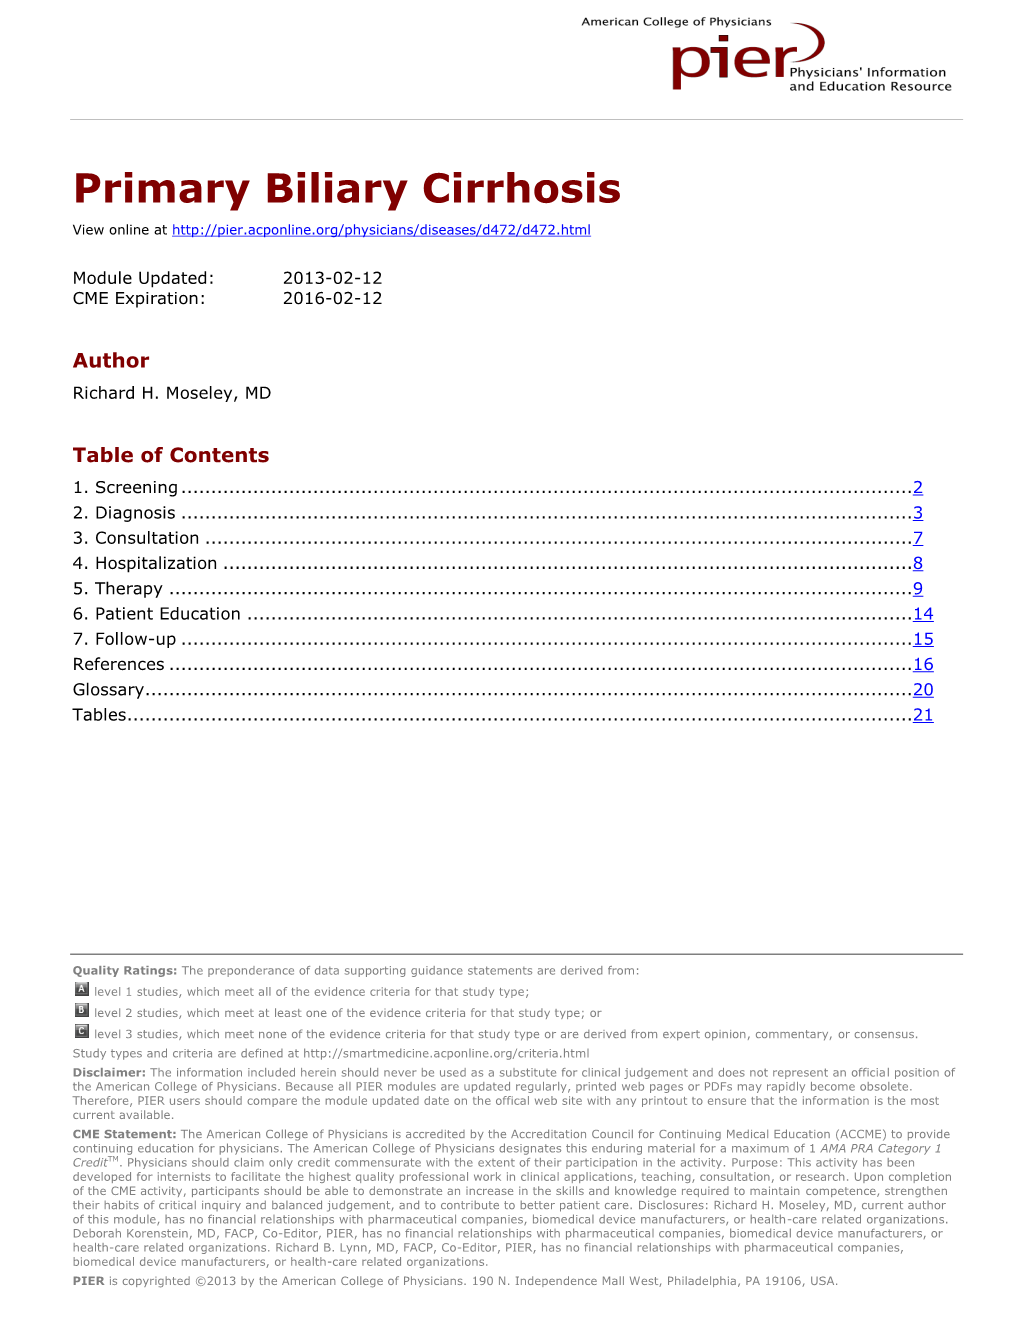 Primary Biliary Cirrhosis View Online At